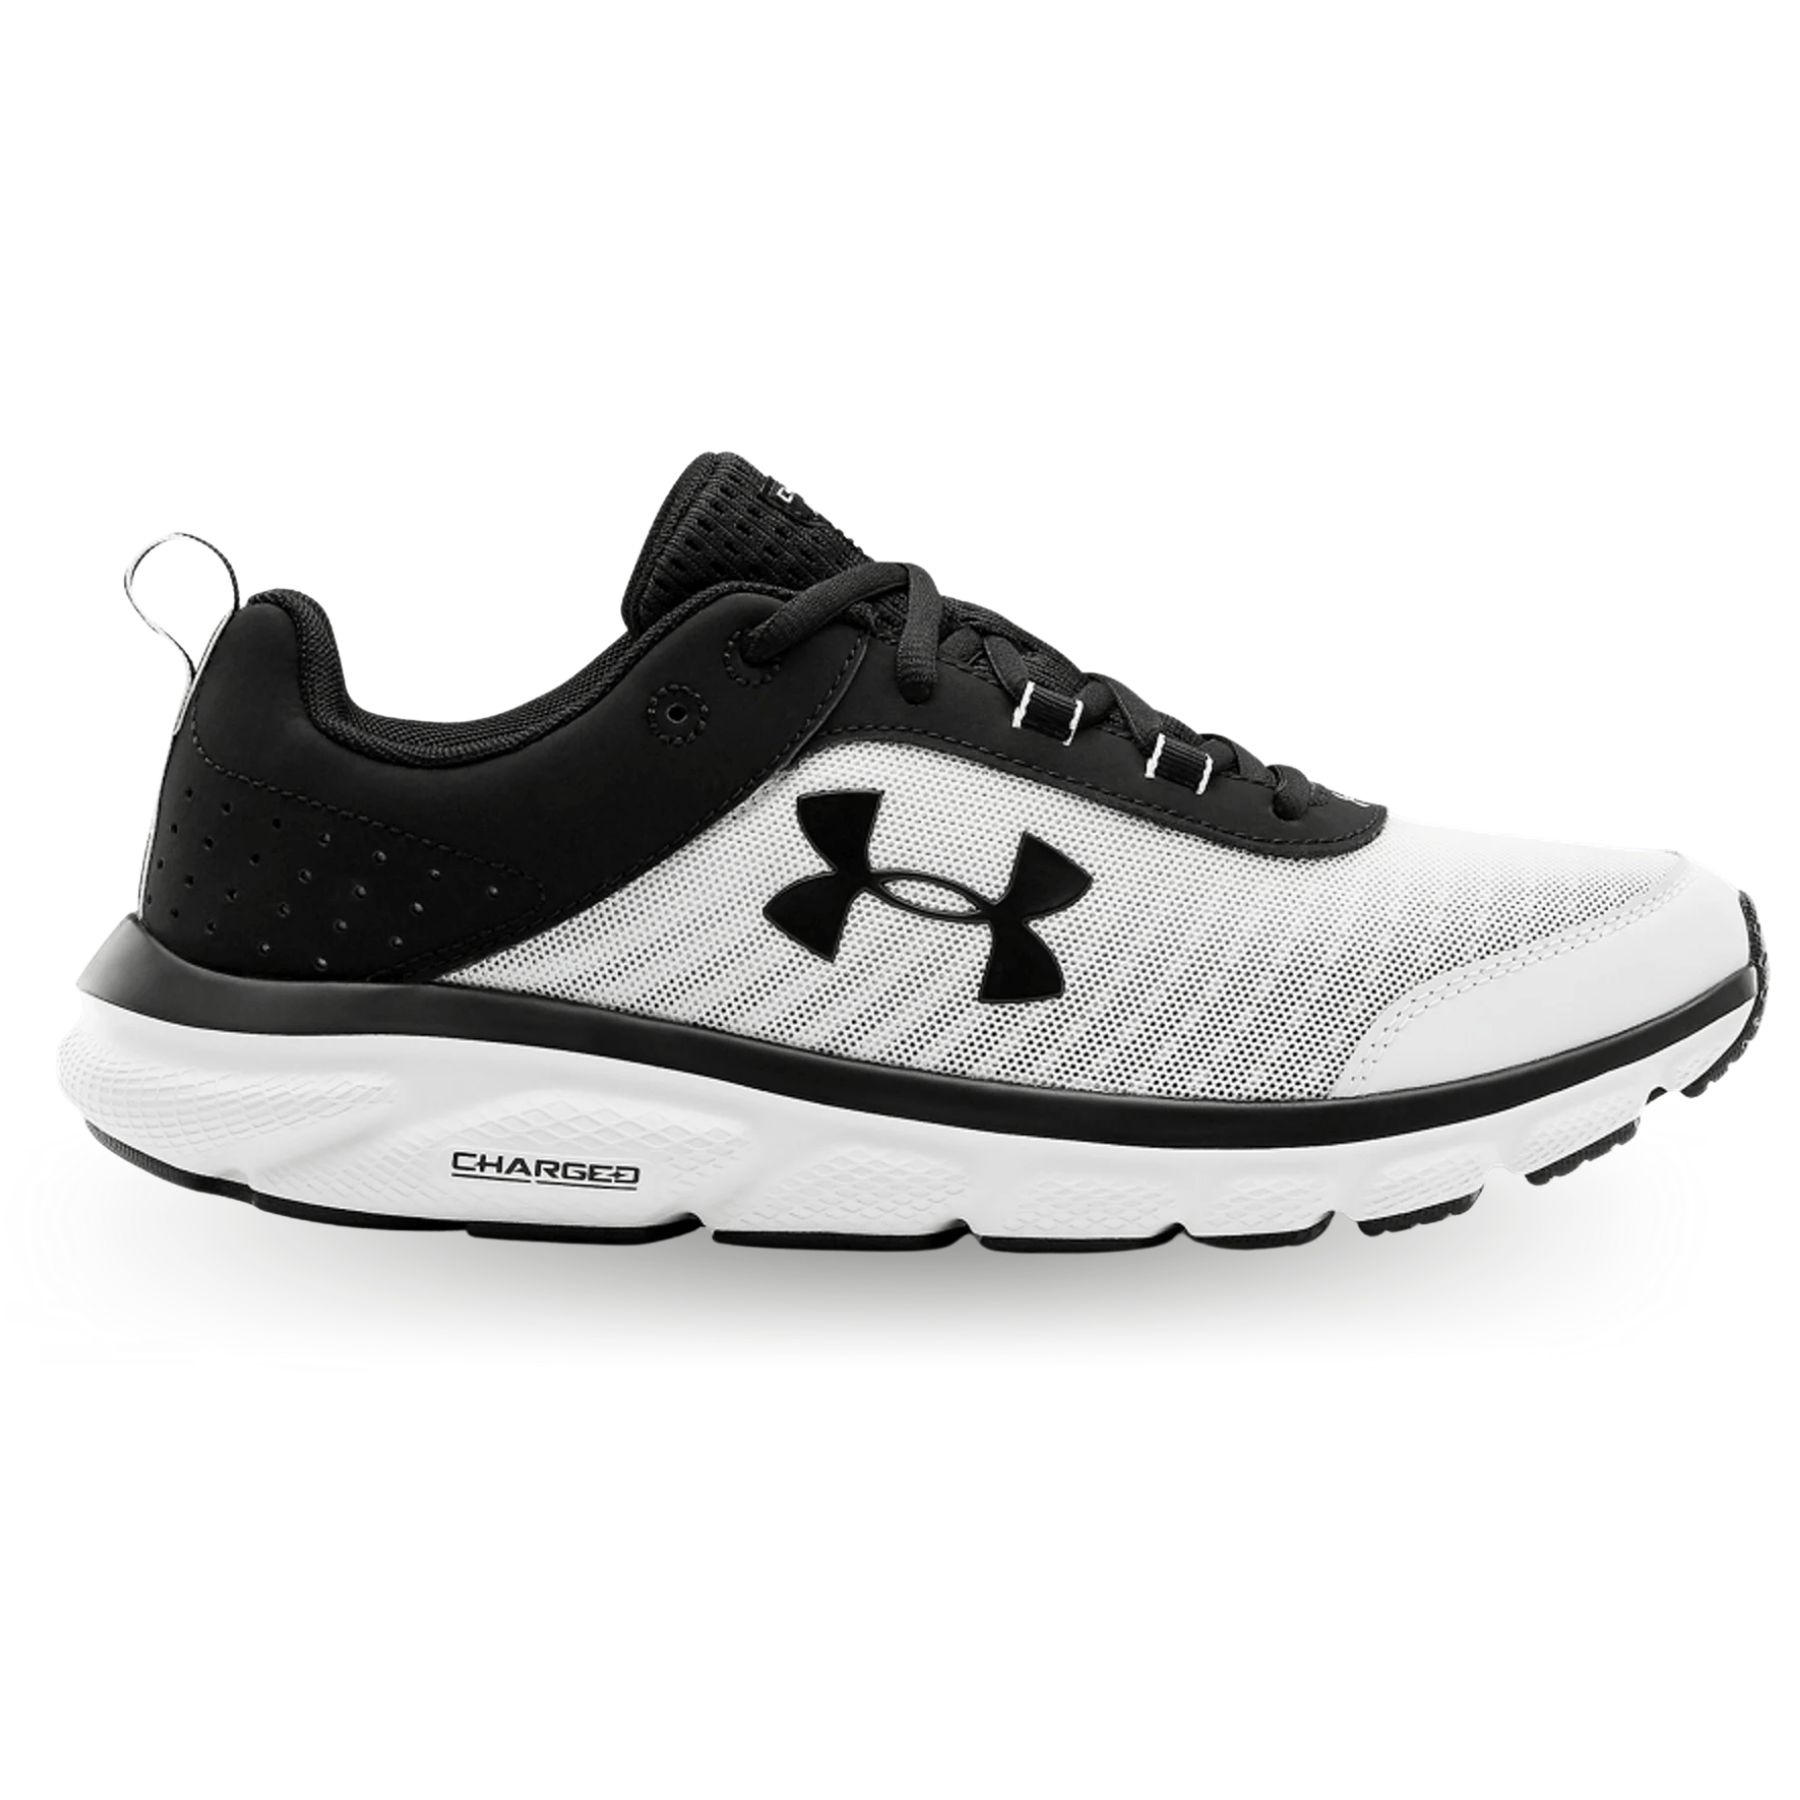 Under Armour Charged Assert 9 4E - 3024857 400